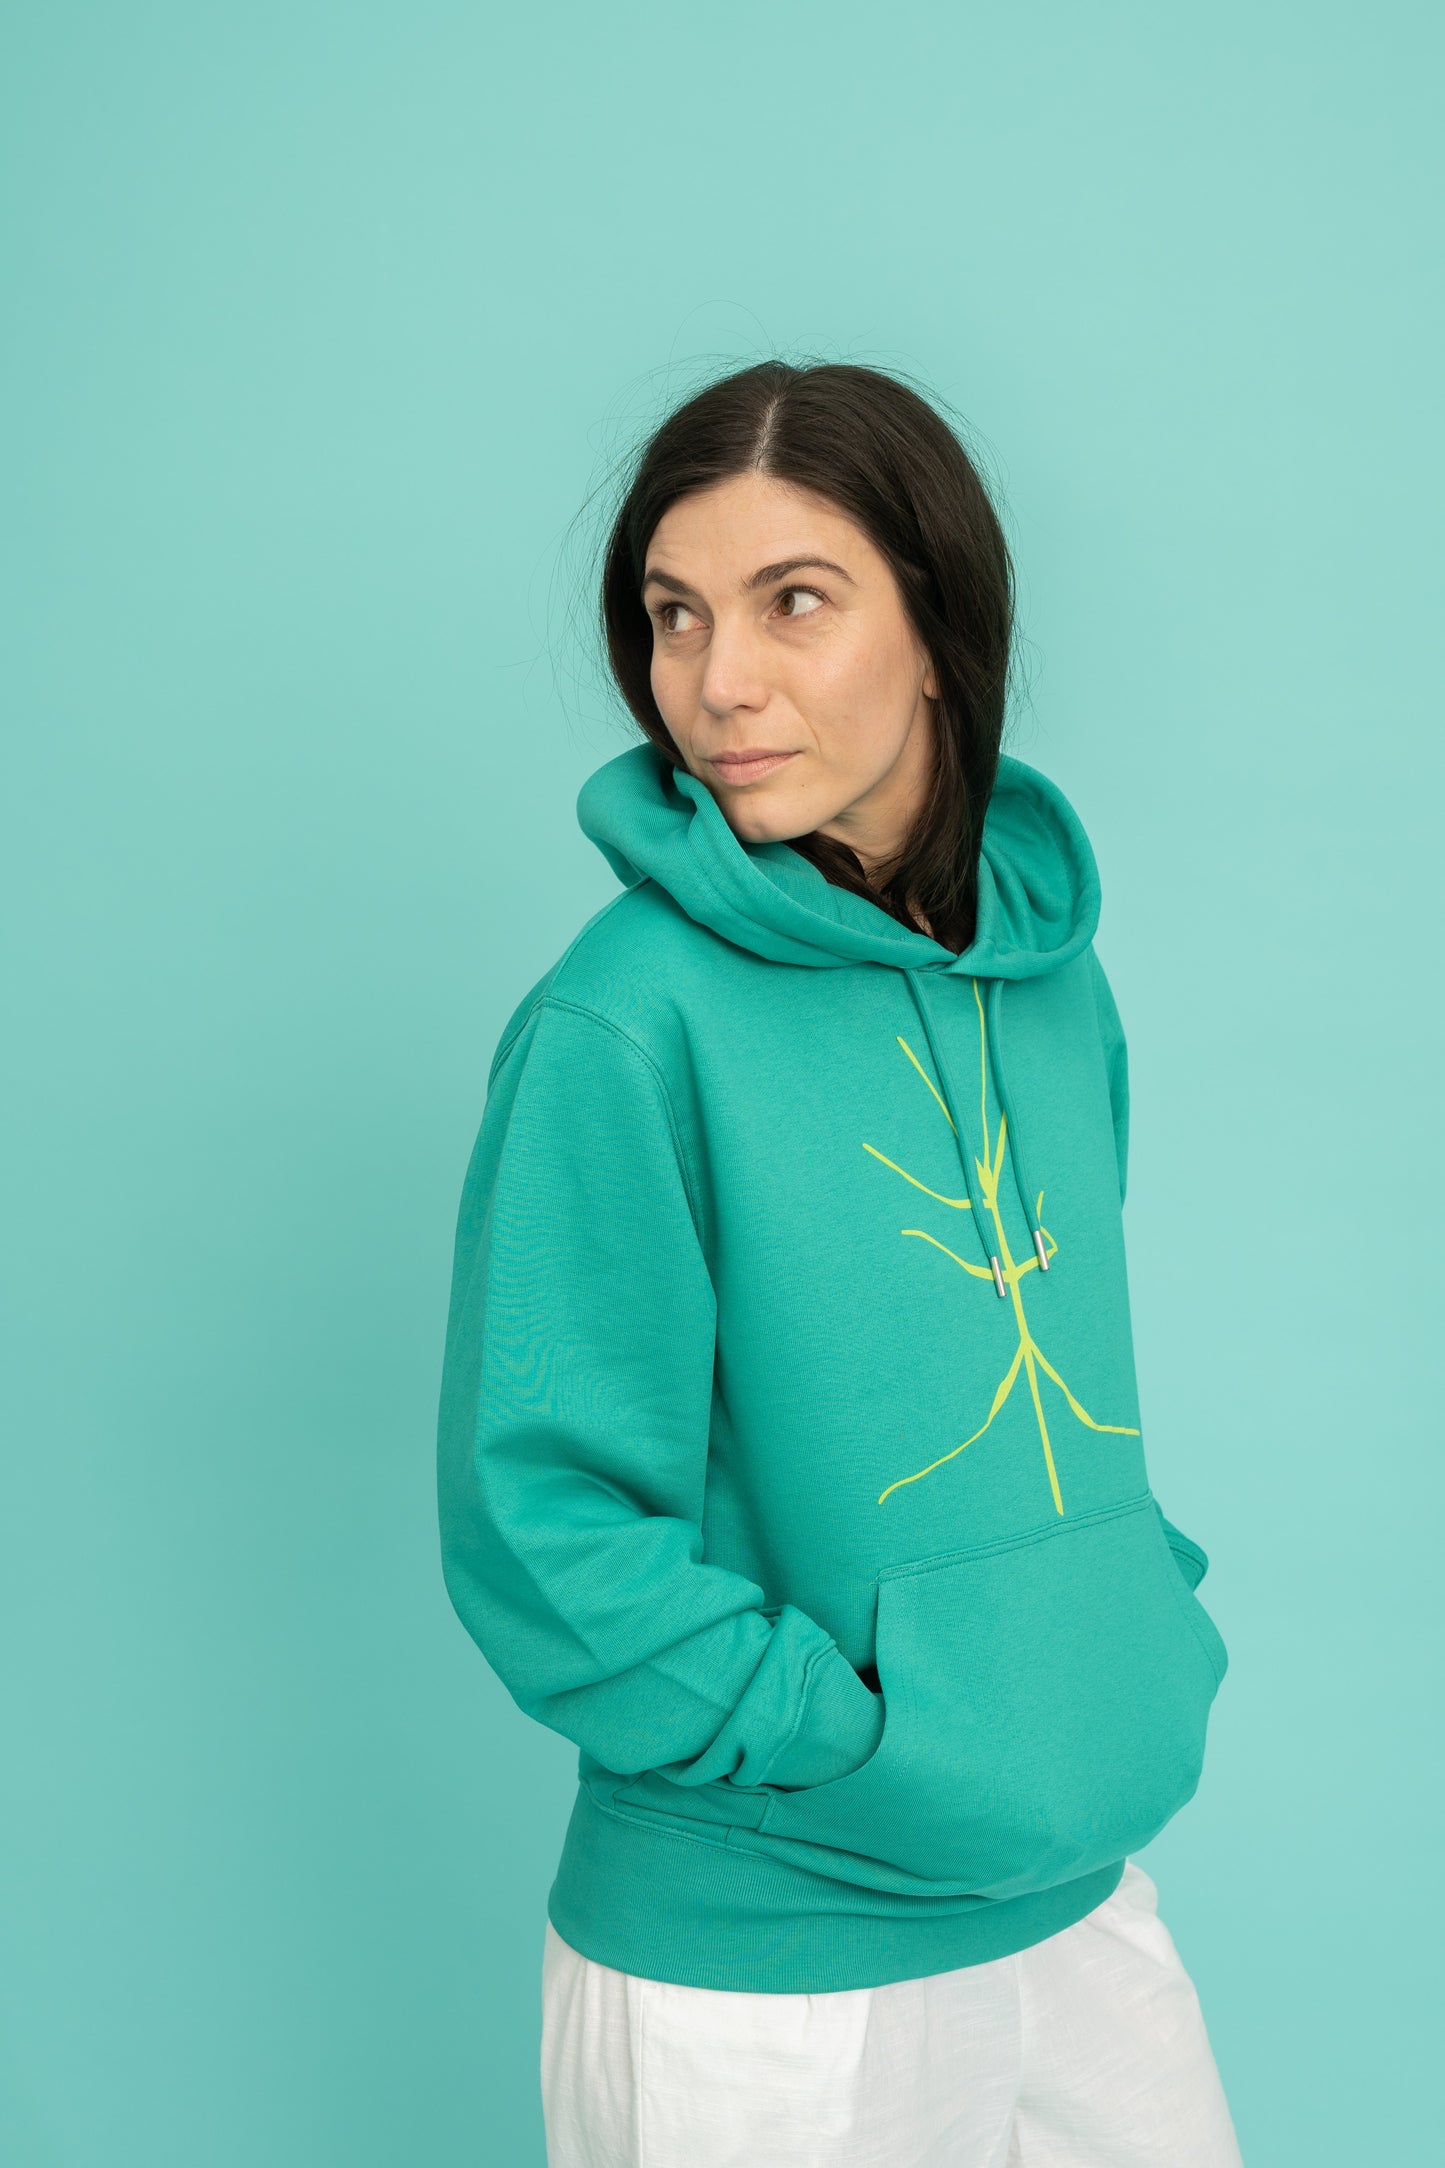 Turquoise hoodie and a walking stick in front